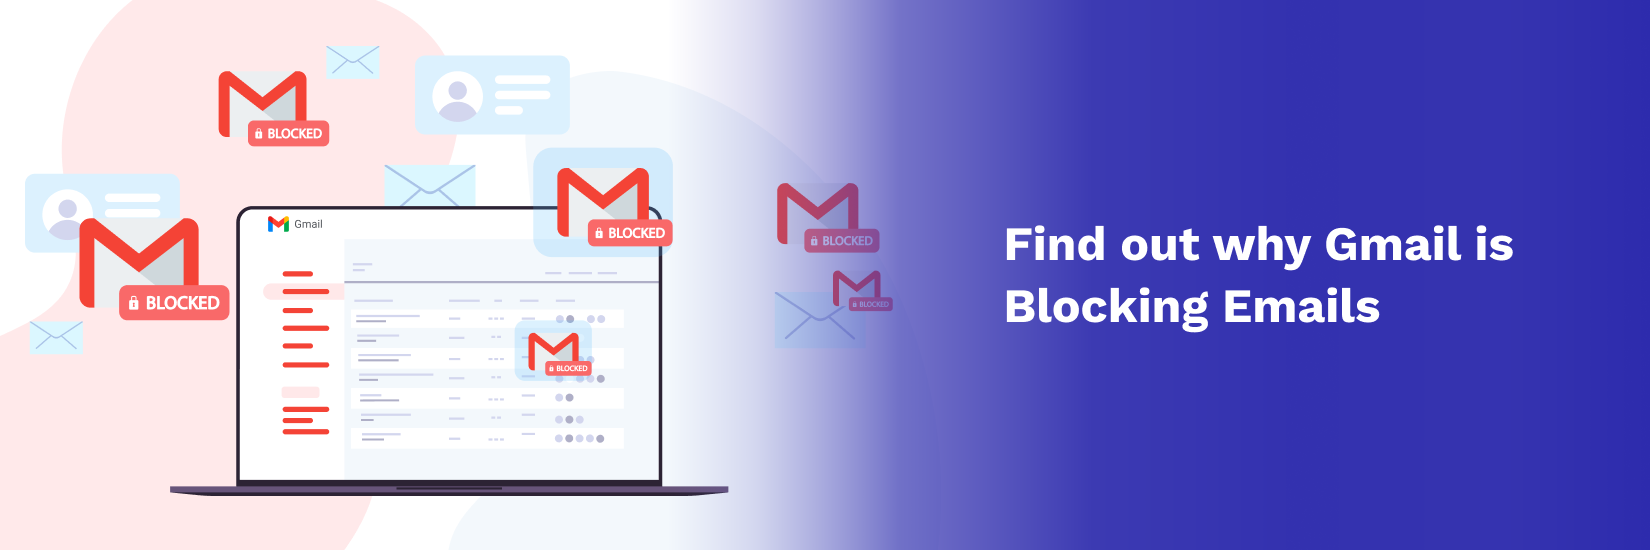 How to Check if Gmail is Blocking Emails | GlockApps